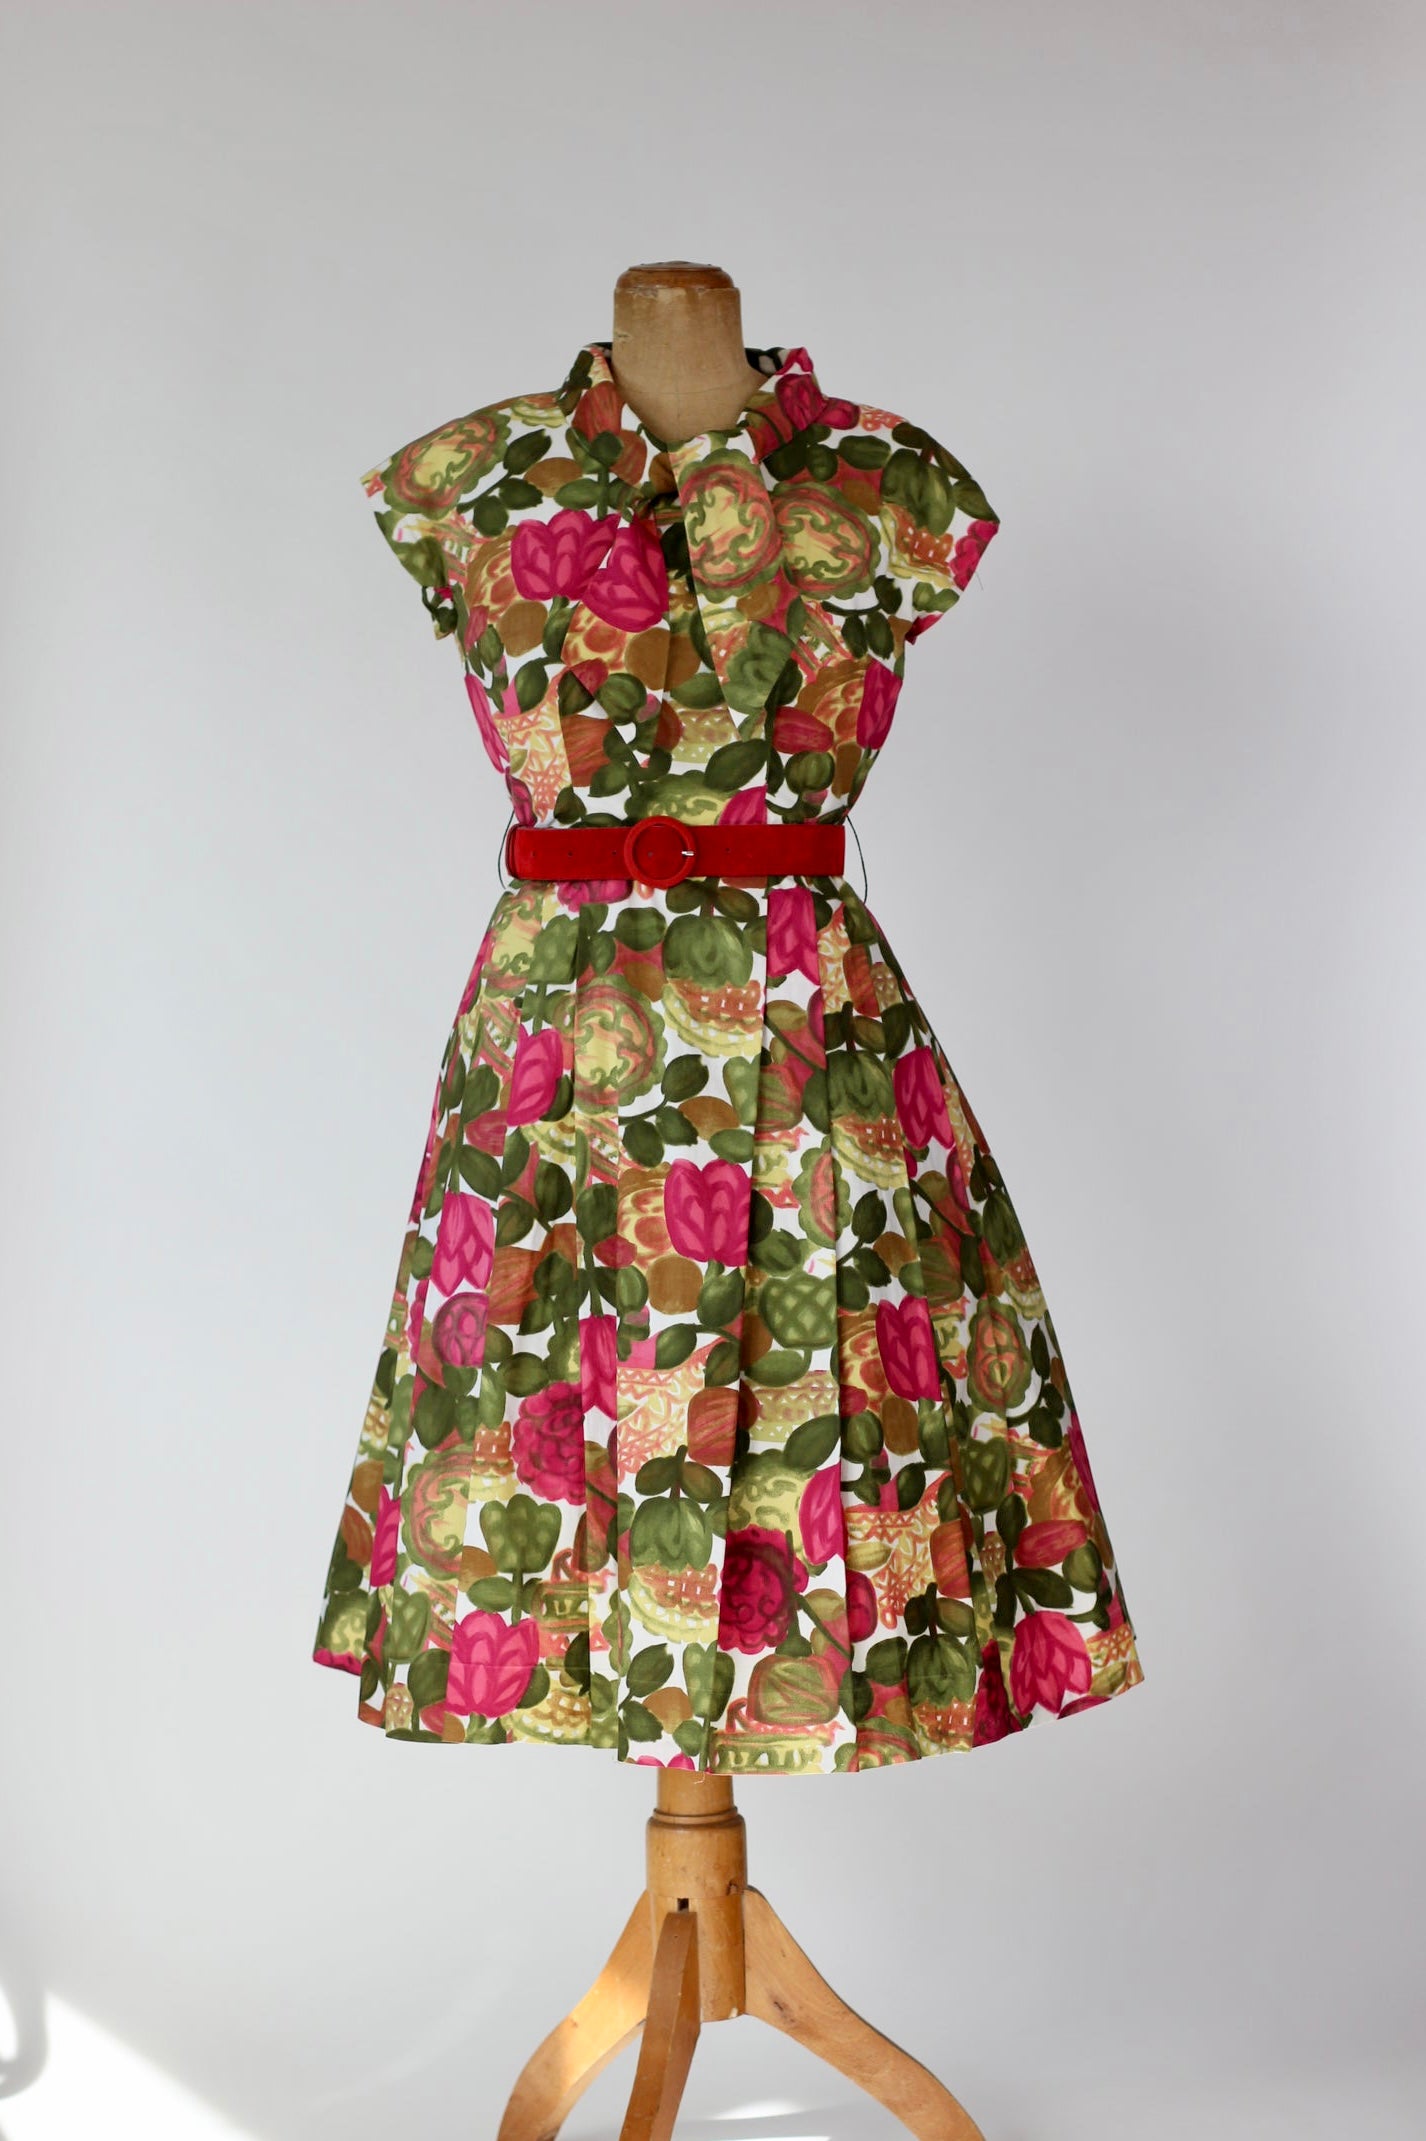 1950s Cotton Dress with Pleated Skirt/Bright Floral Print//Size M